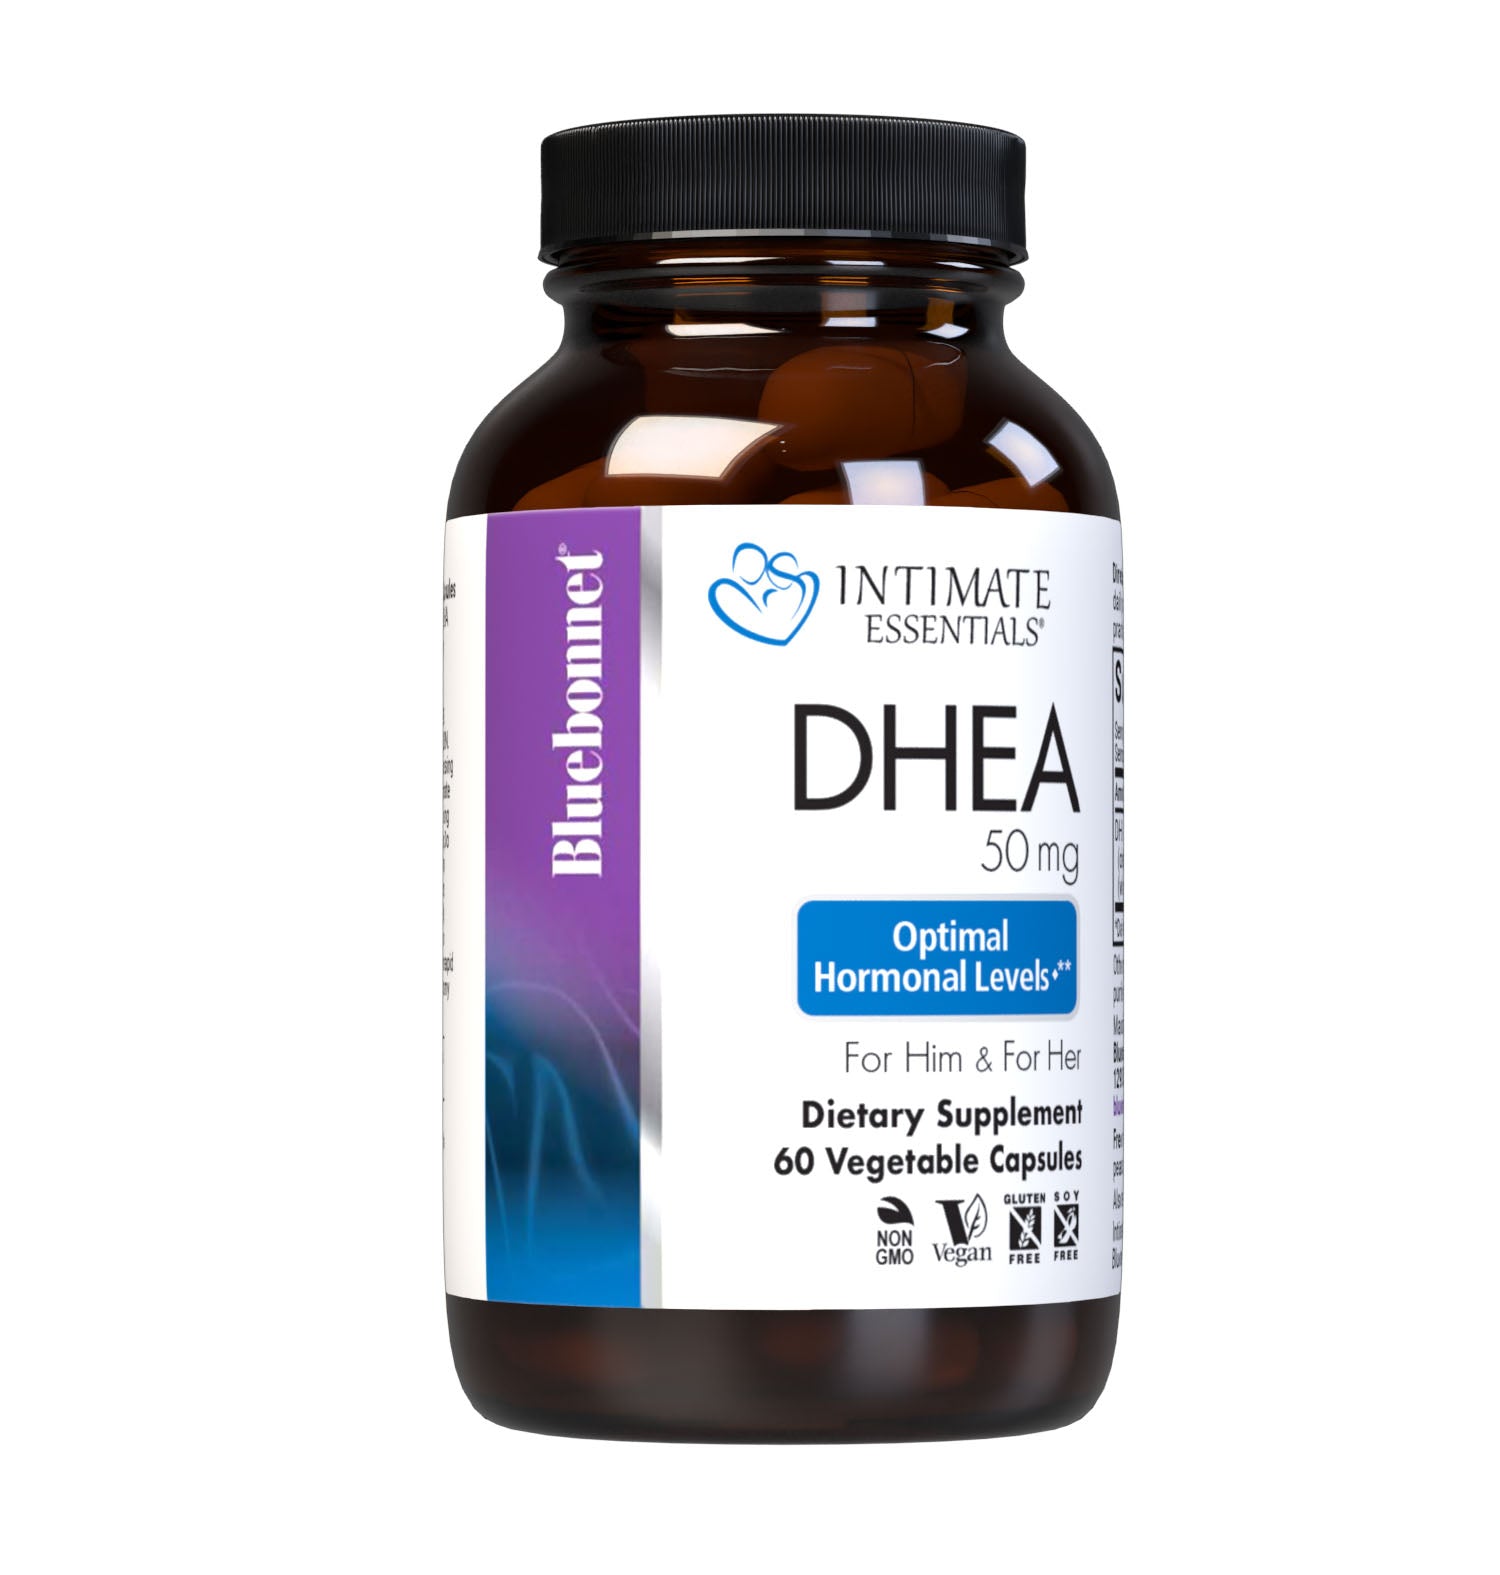 Bluebonnet’s Intimate Essentials DHEA 50 mg Vegetable Capsules derived from wild yams are specially formulated to support DHEA levels within the normal range for healthy sexual and fertility function in both men and women. #size_60 count